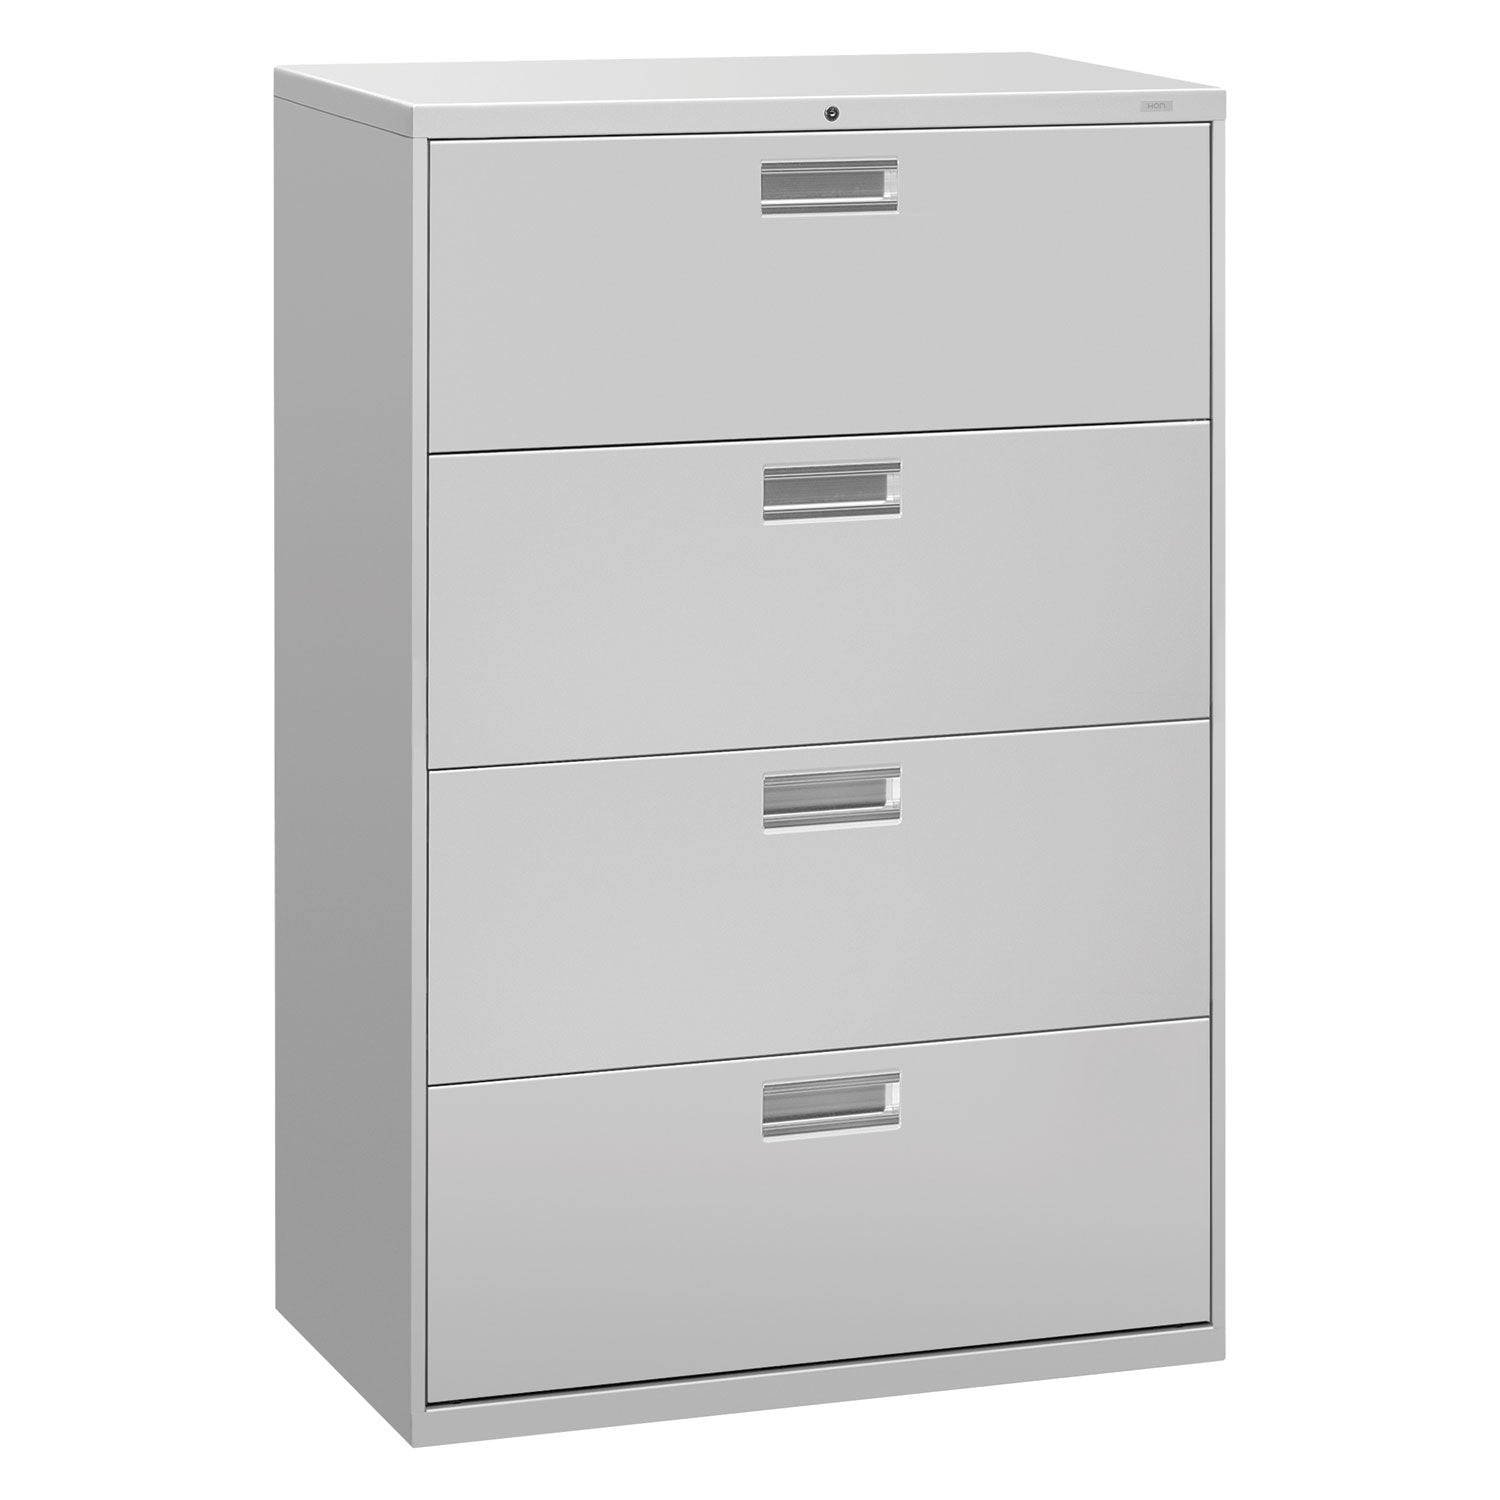 Brigade 600 Series Lateral File, 4 Legal/Letter-Size File Drawers, Light Gray, 36" x 18" x 52.5 - 